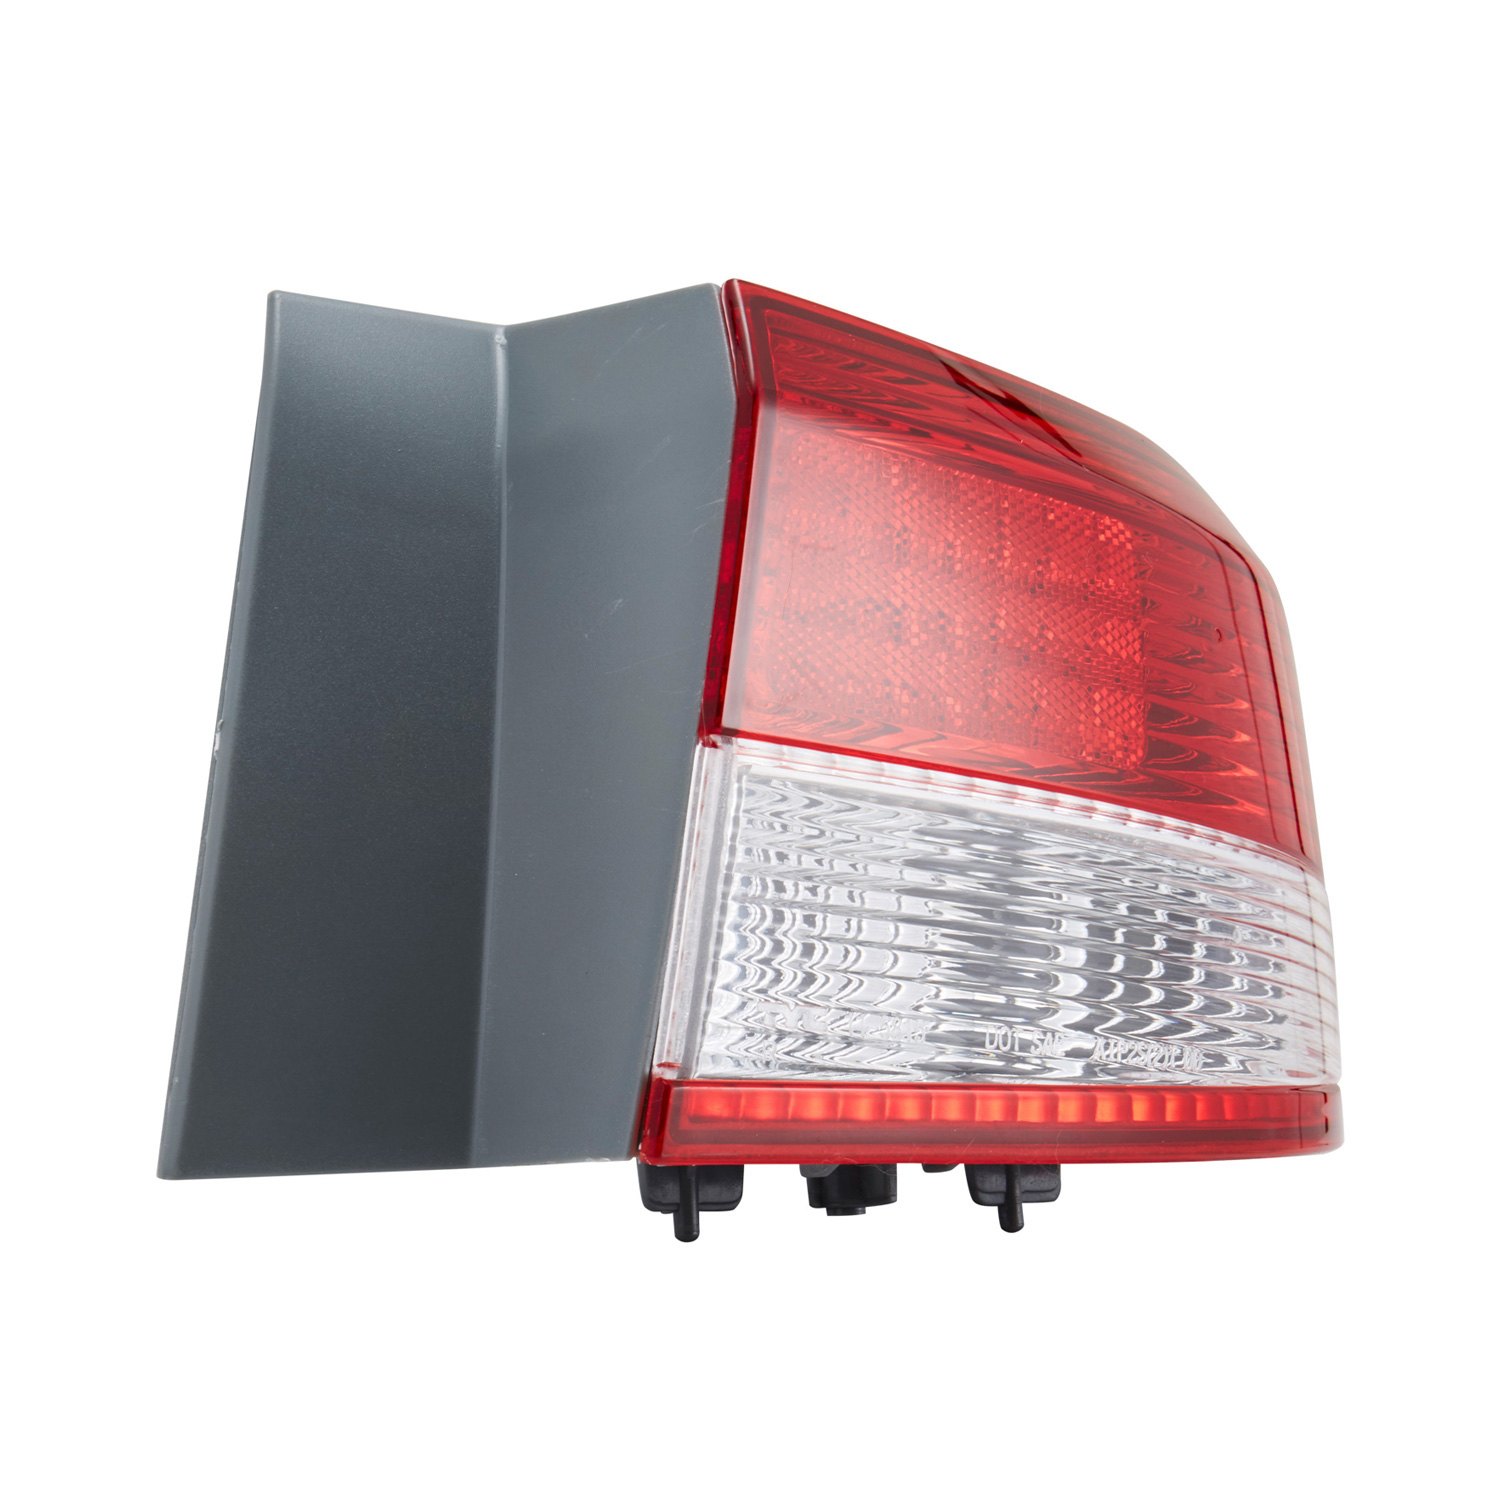 TYC 11-5815-01-1 Honda Accord Right Replacement Tail Lamp 